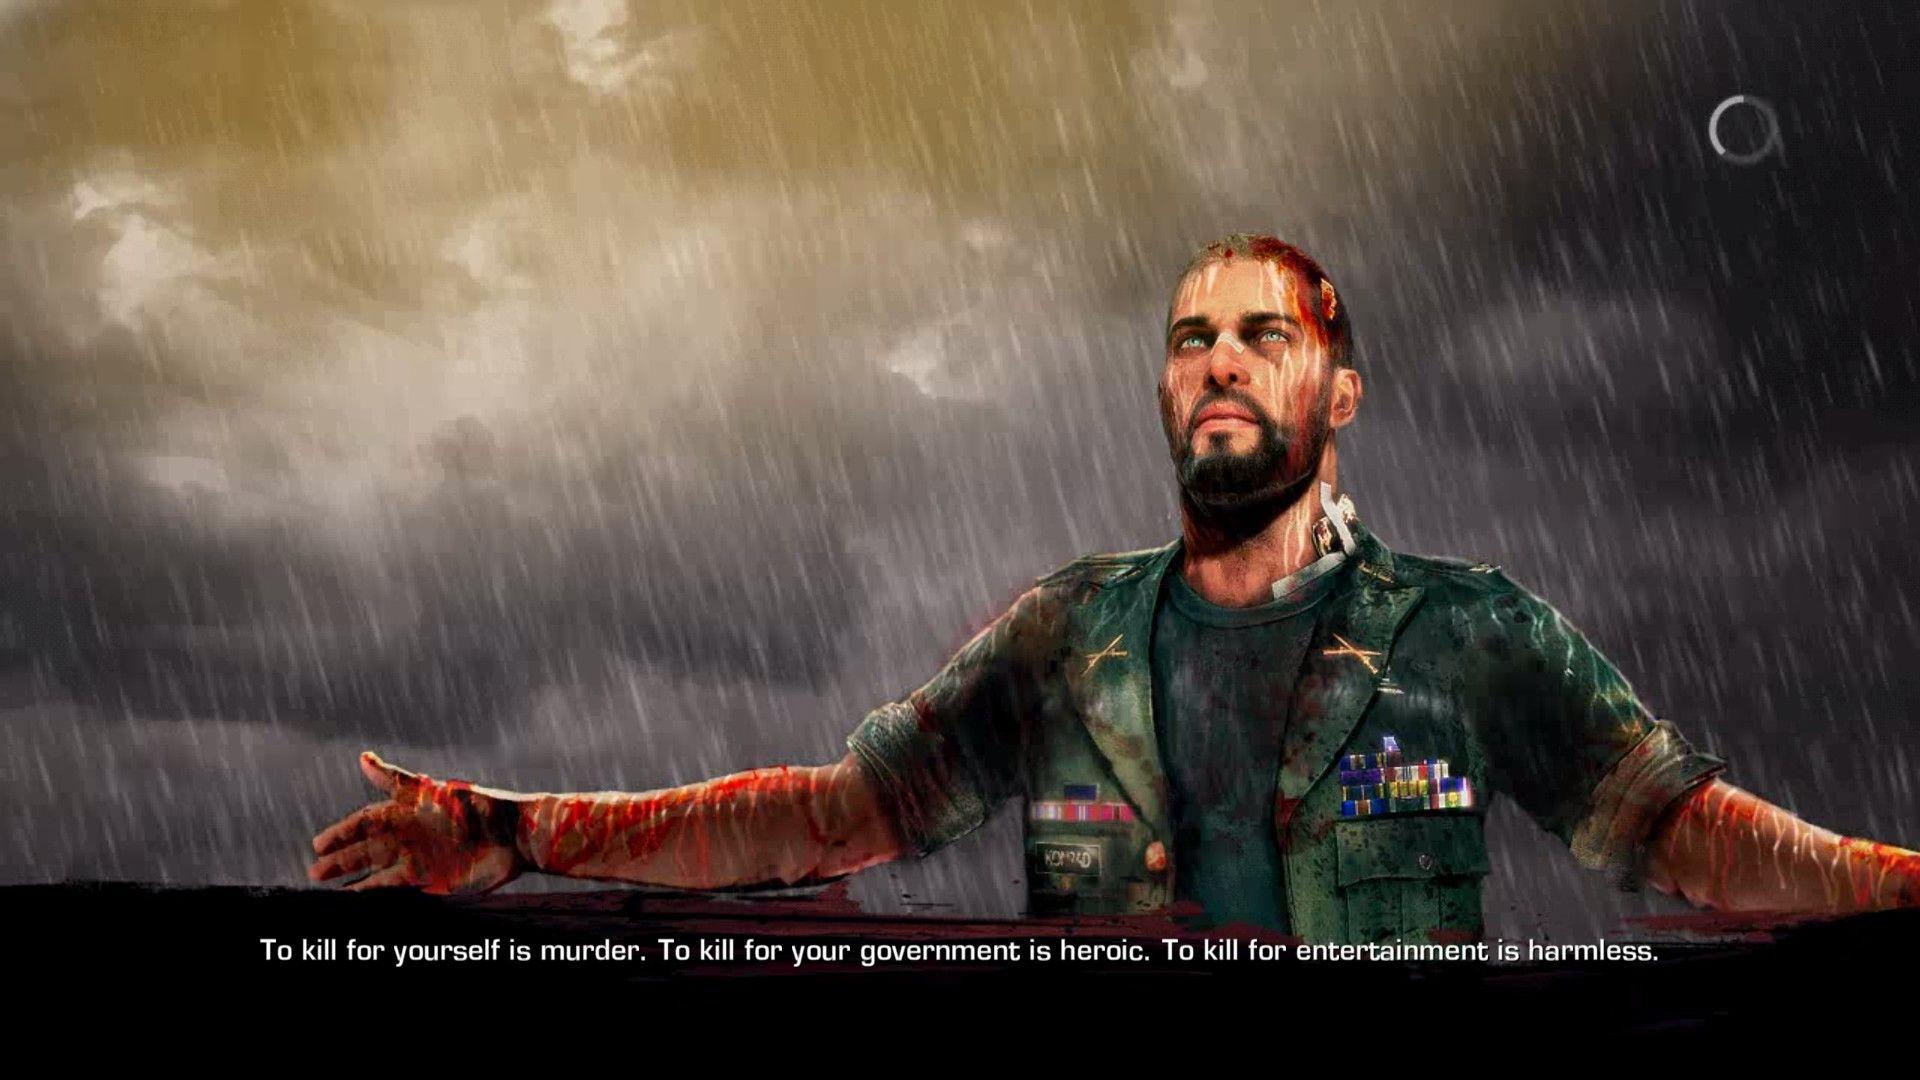 spec ops the line loading screen messages